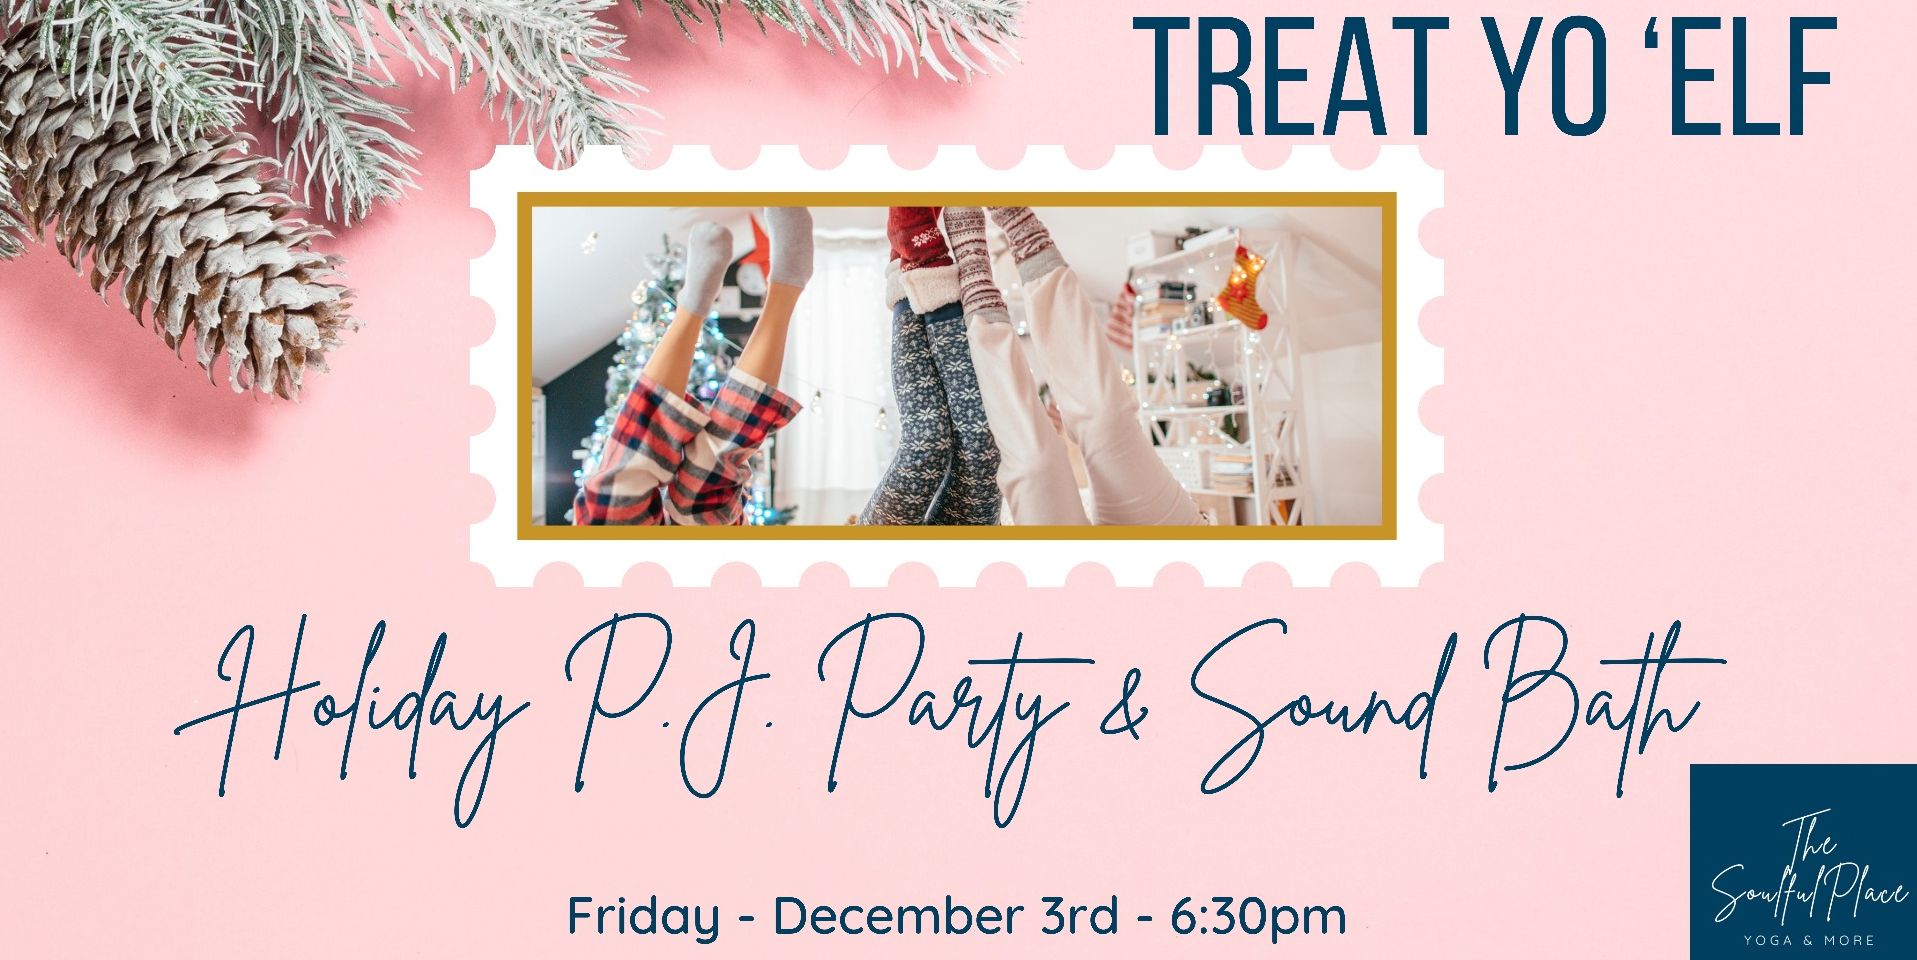 Holiday PJ Party & Sound Bath promotional image